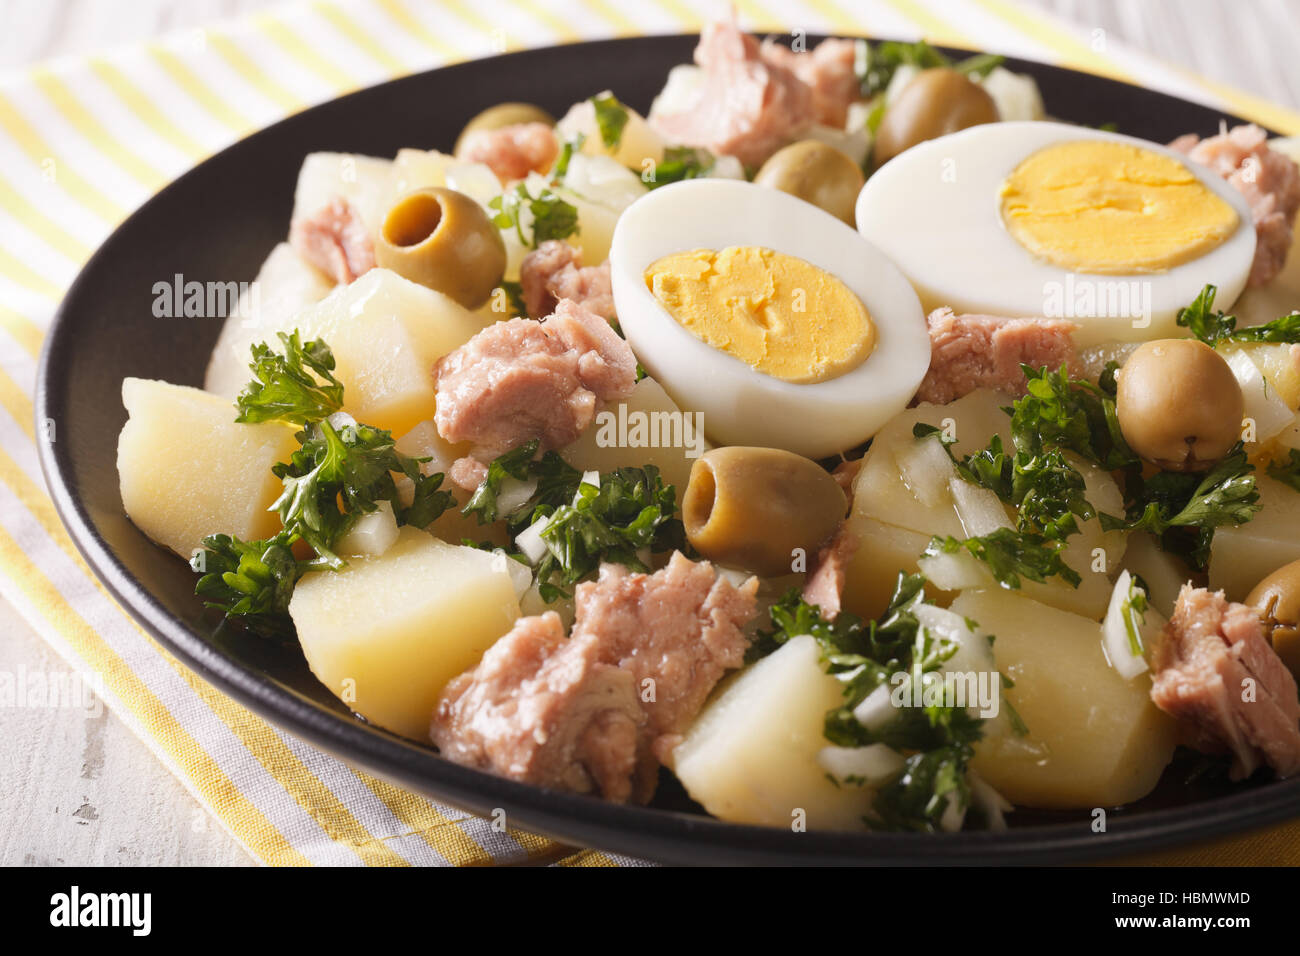 Spanish boiled potatoes with tuna, egg and olives close-up on a plate. horizontal Stock Photo